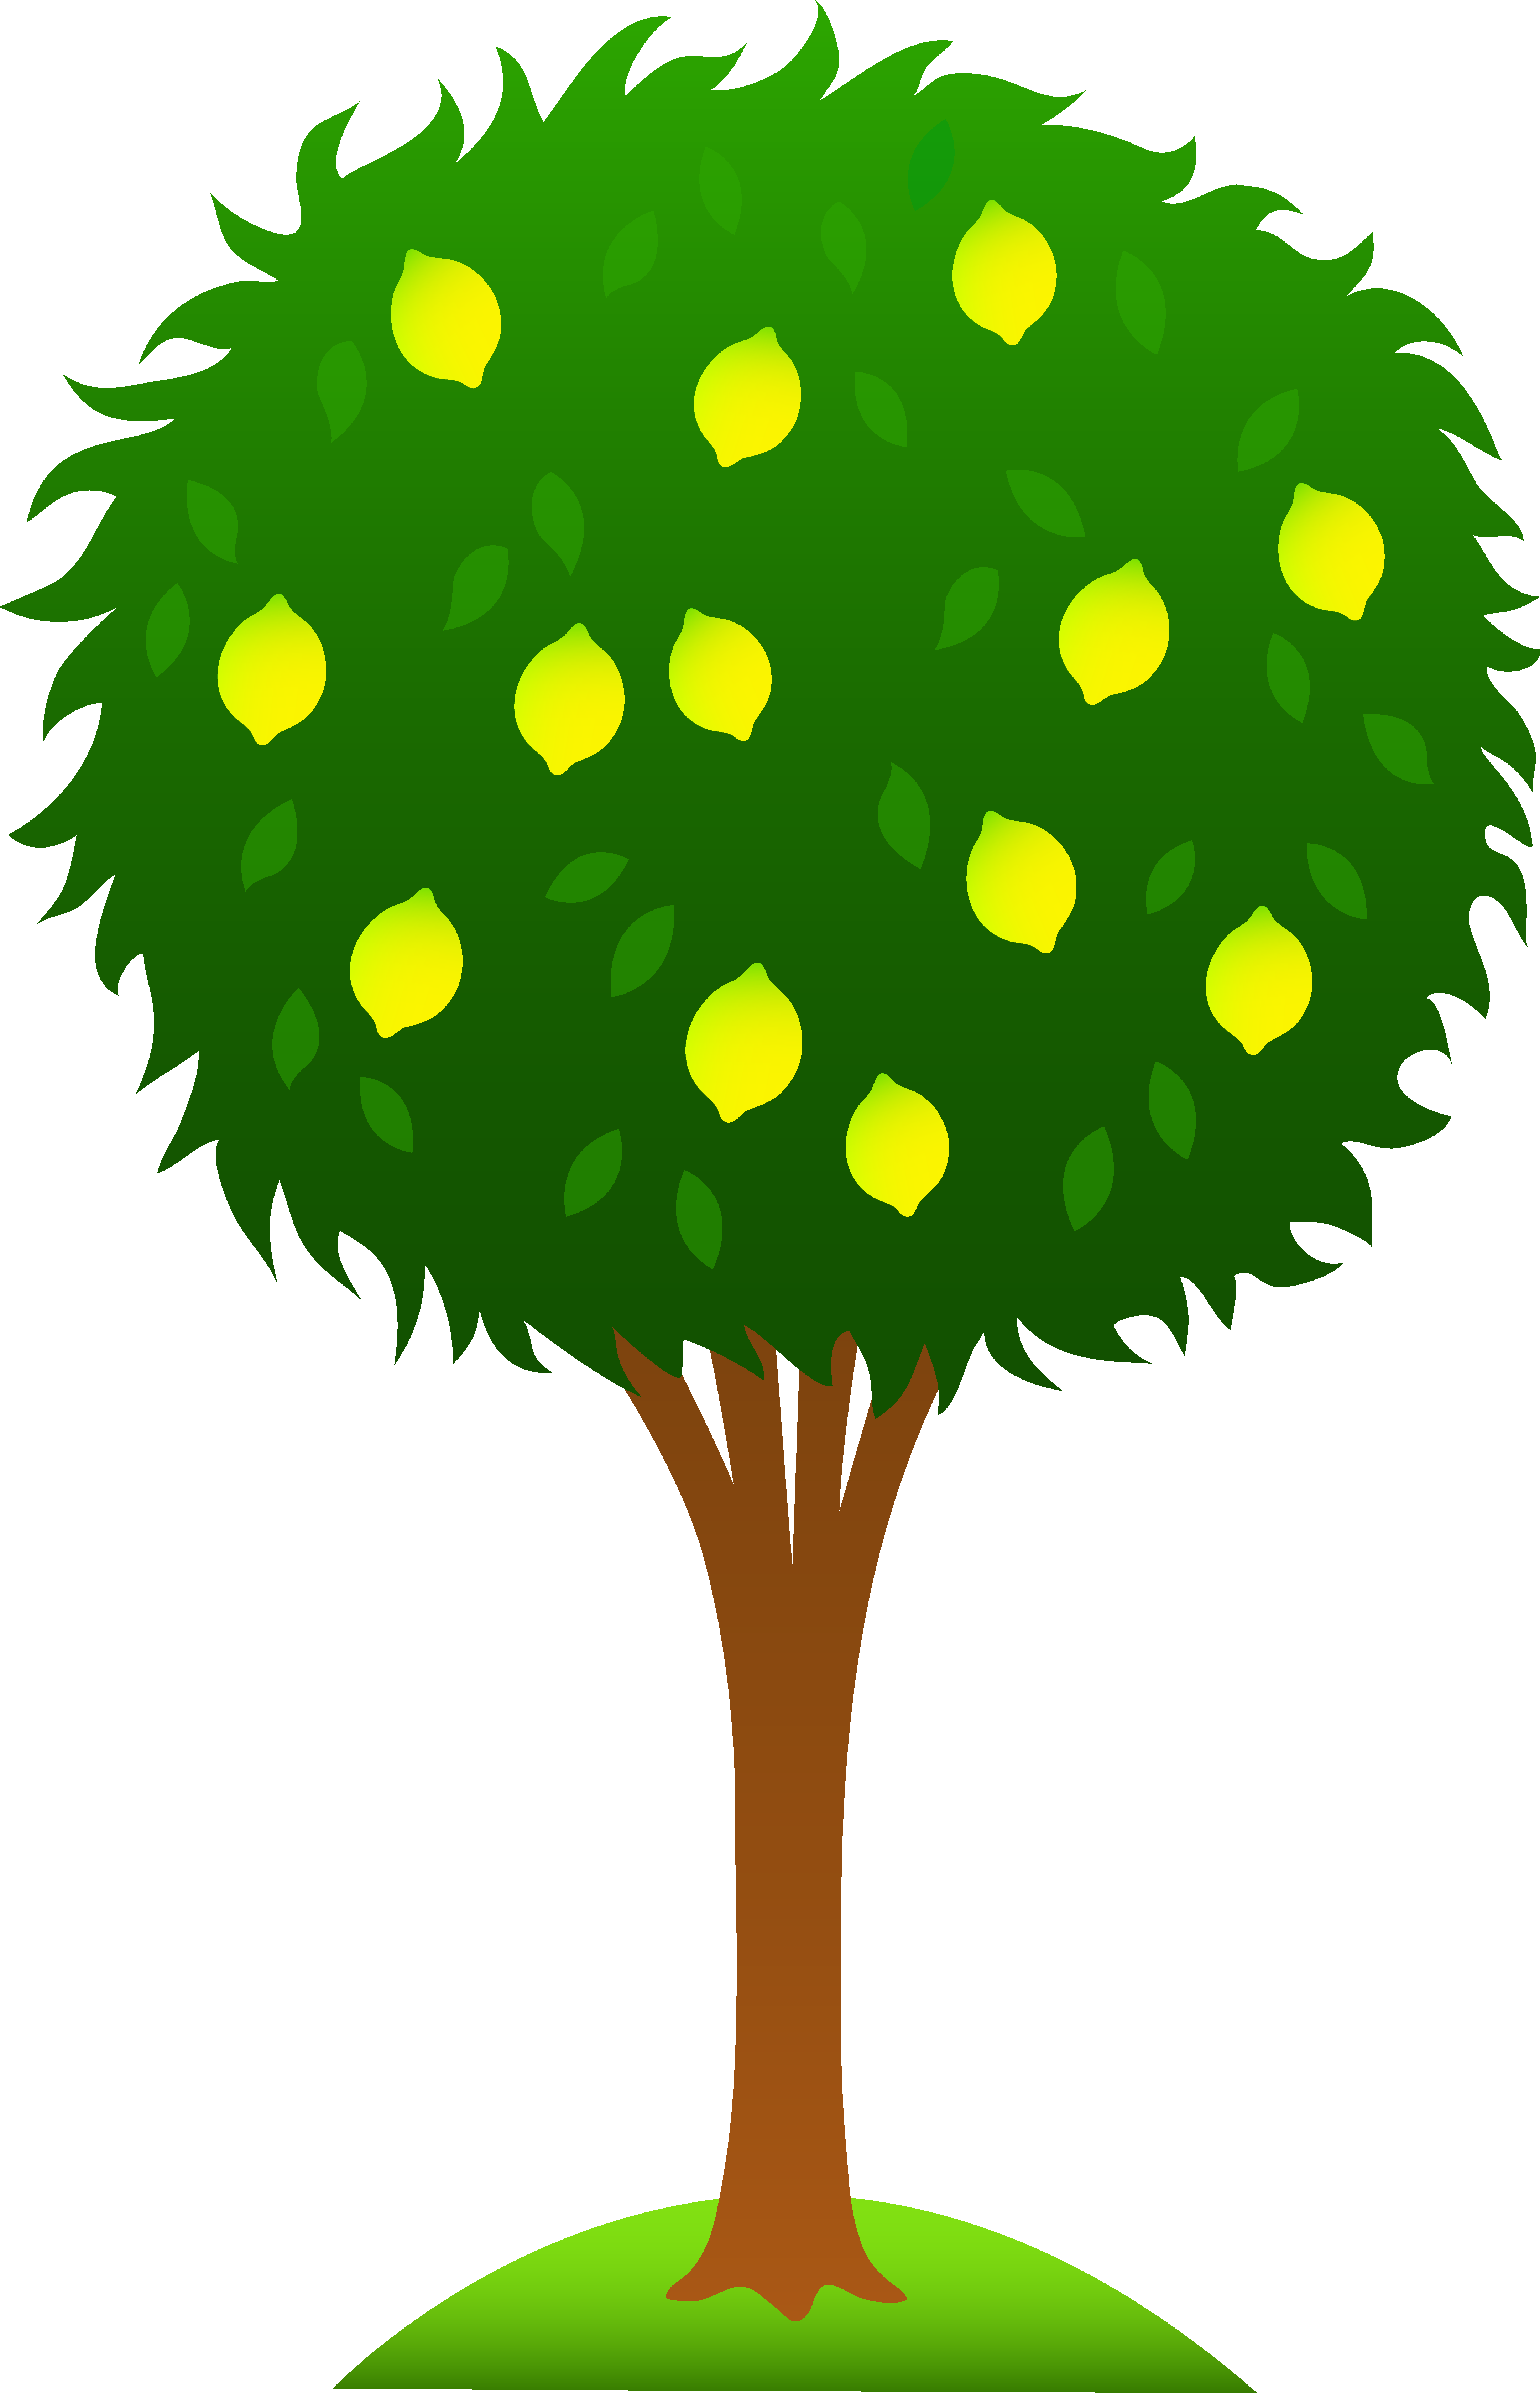 clipart tree images - photo #46